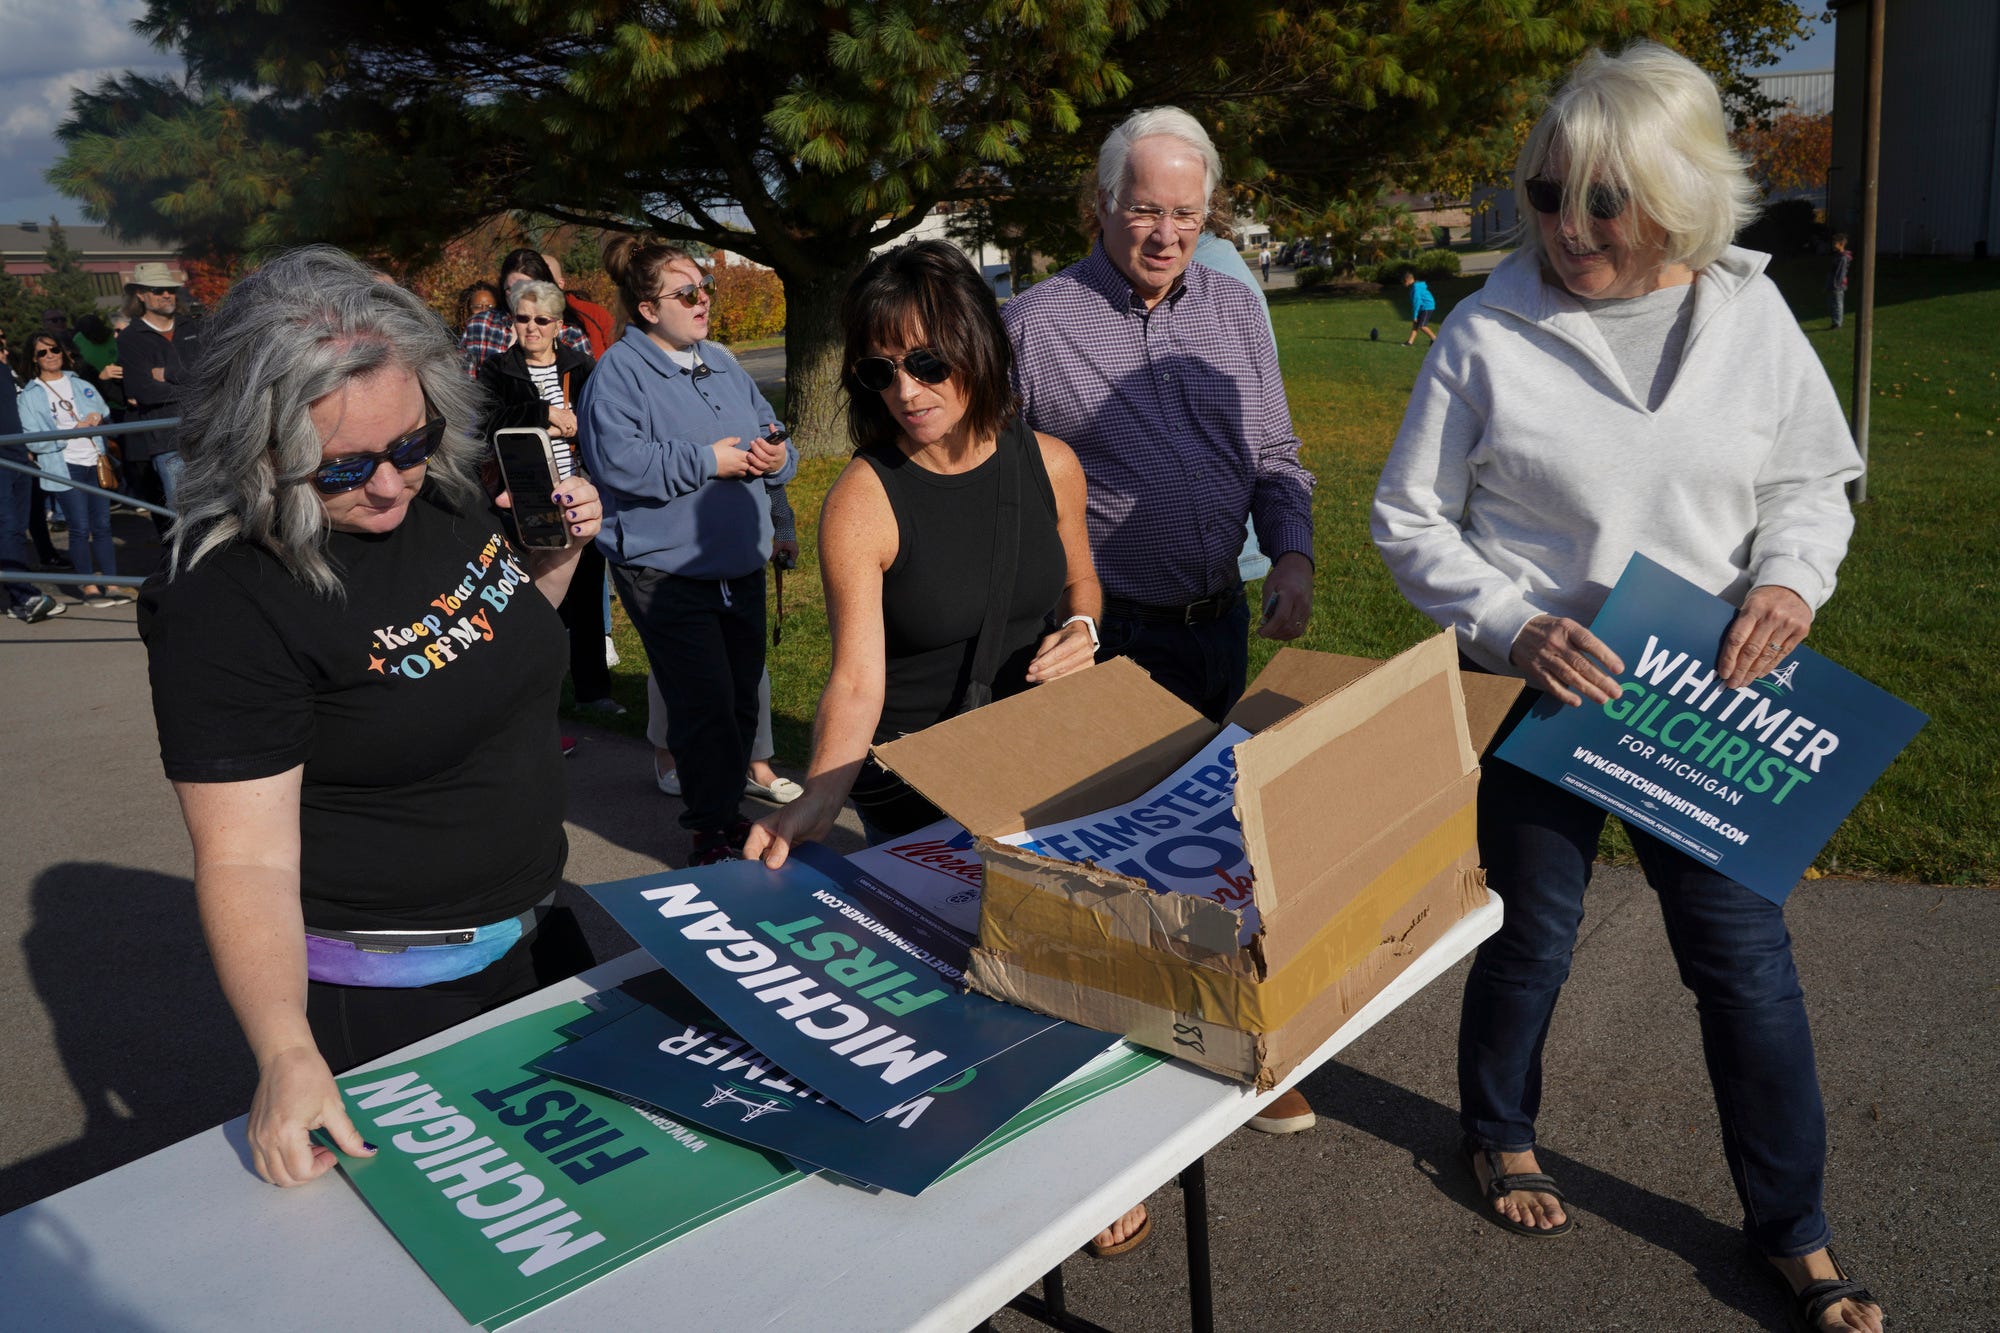 Supporters of Michigan Gov. Gretchen Whitmer grab campaign signs as they walk into a “Grillin’ with Gretchen” rally held in the parking lot behind the Teamsters Local 406 building in Wyoming on Oct. 23, 2022.